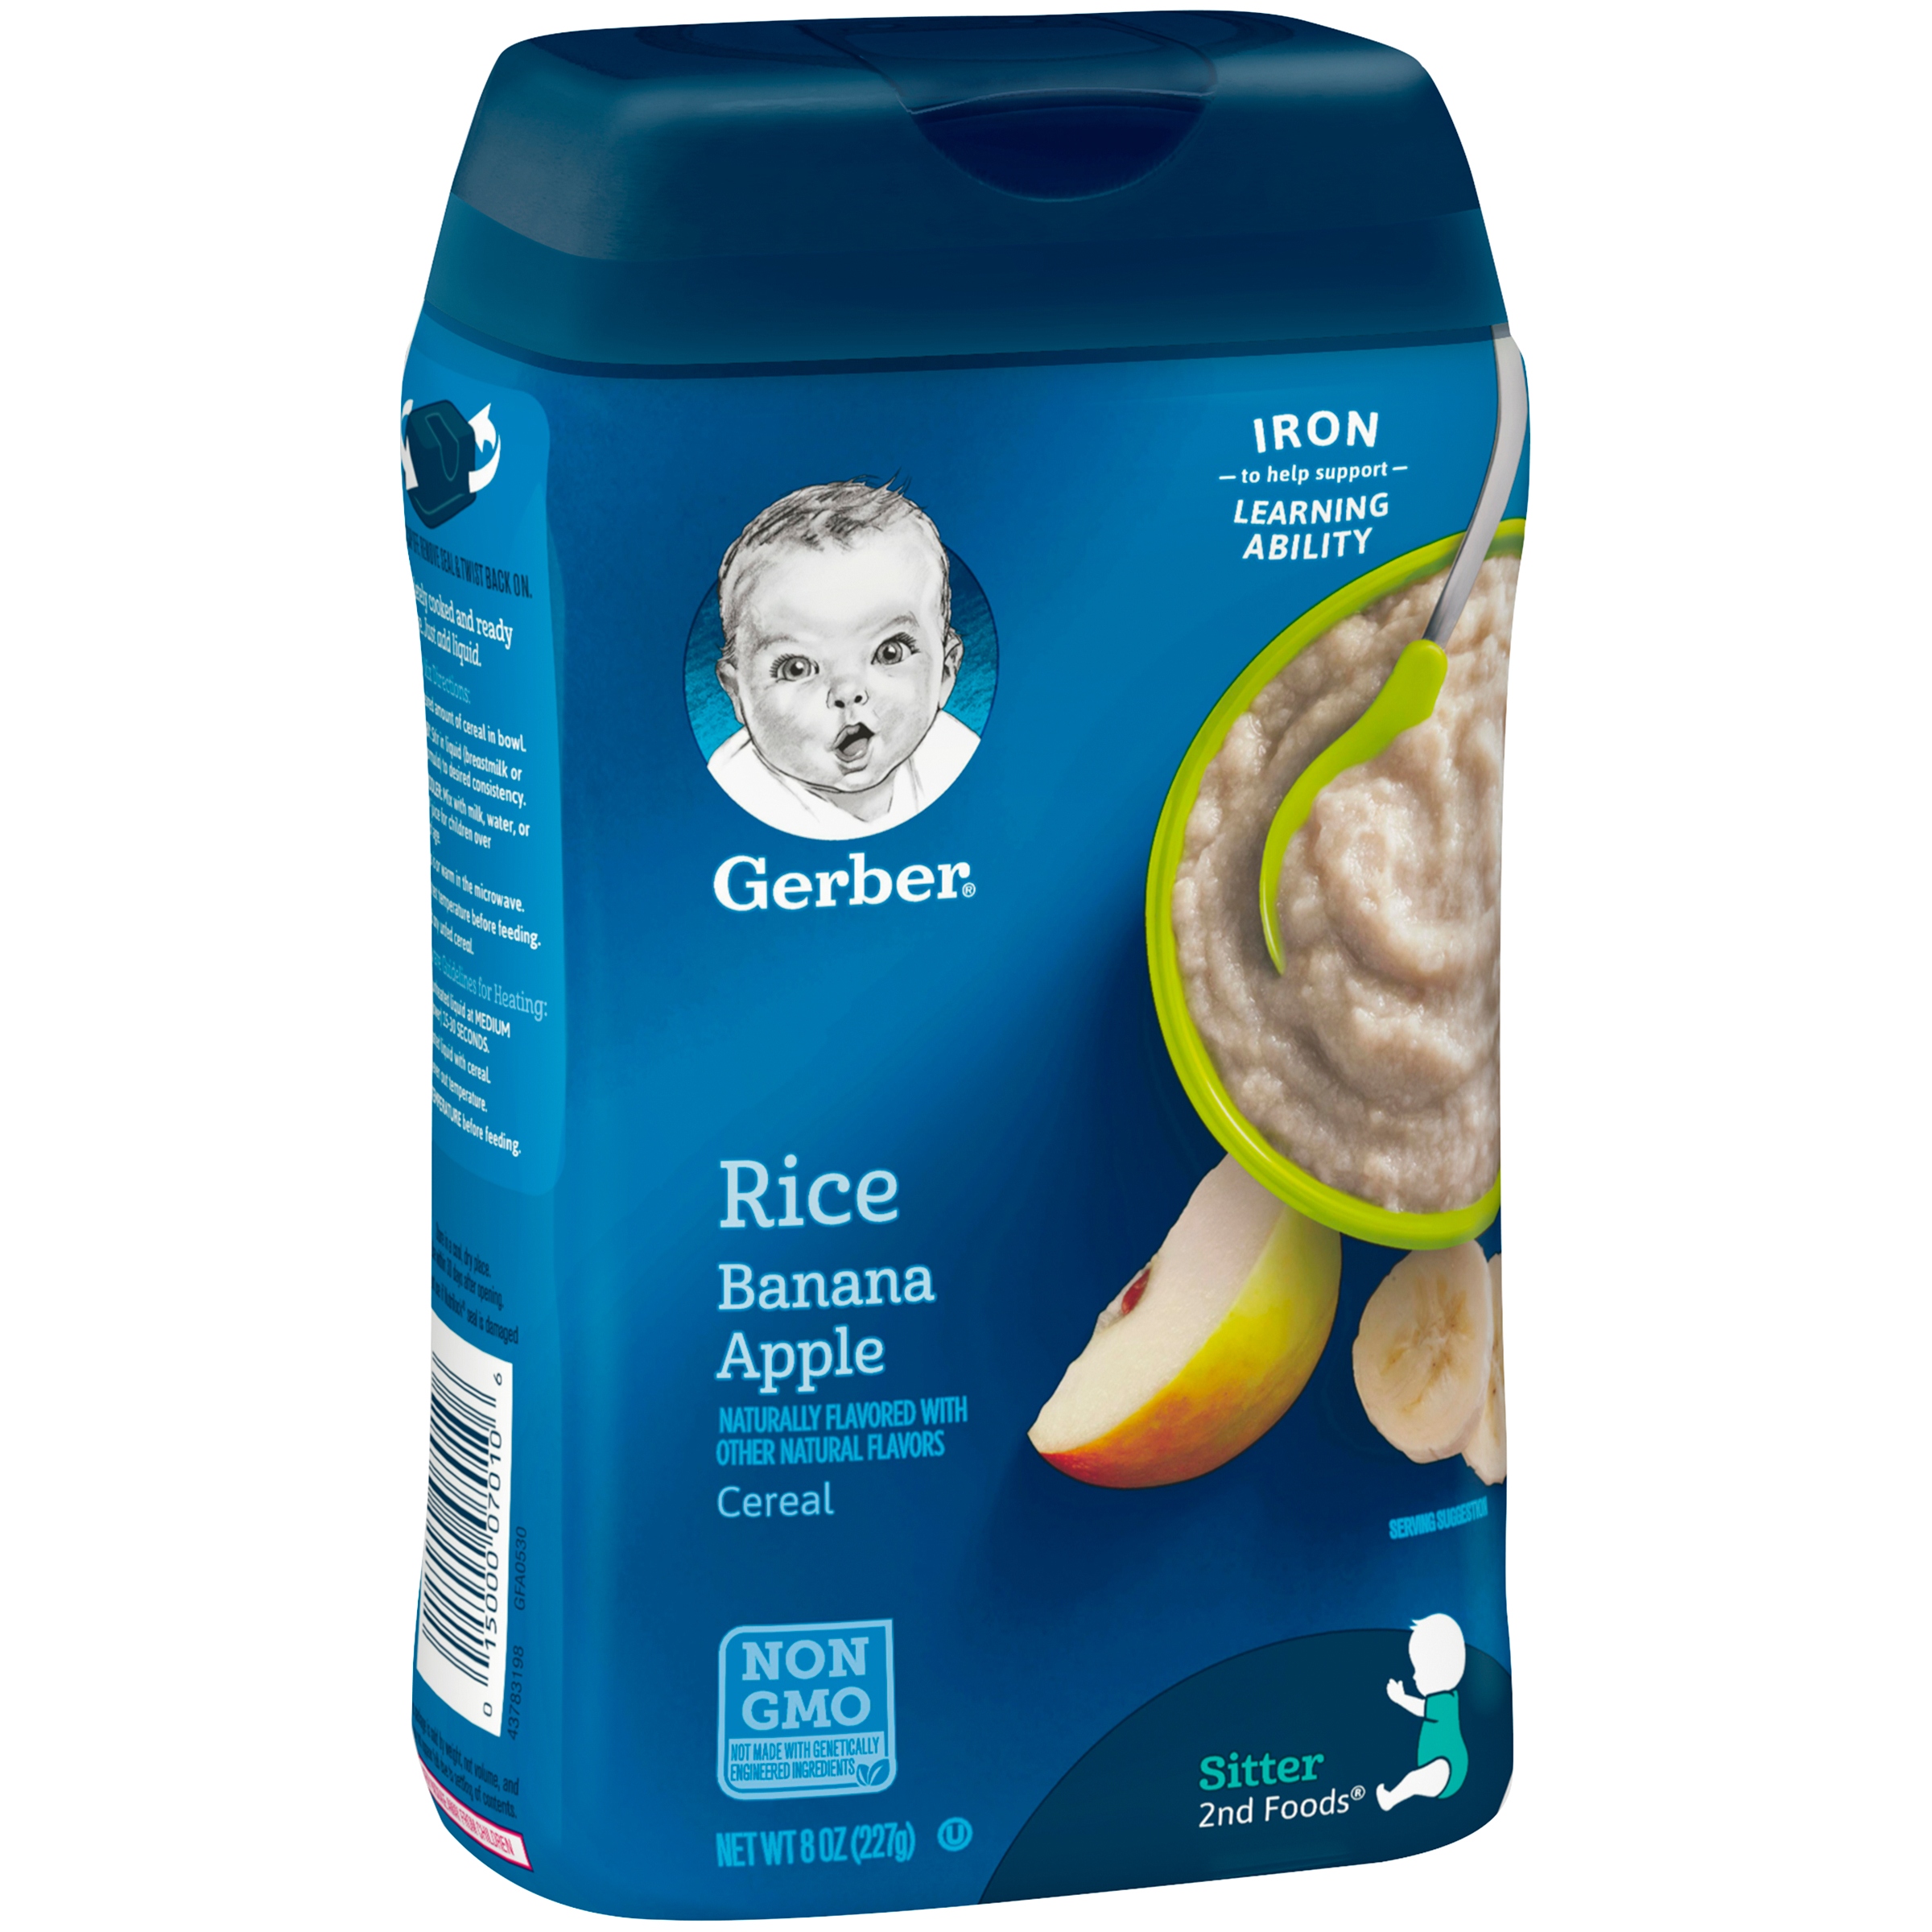 Gerber Rice and Banana Apple Baby Cereal 8 oz - image 5 of 8